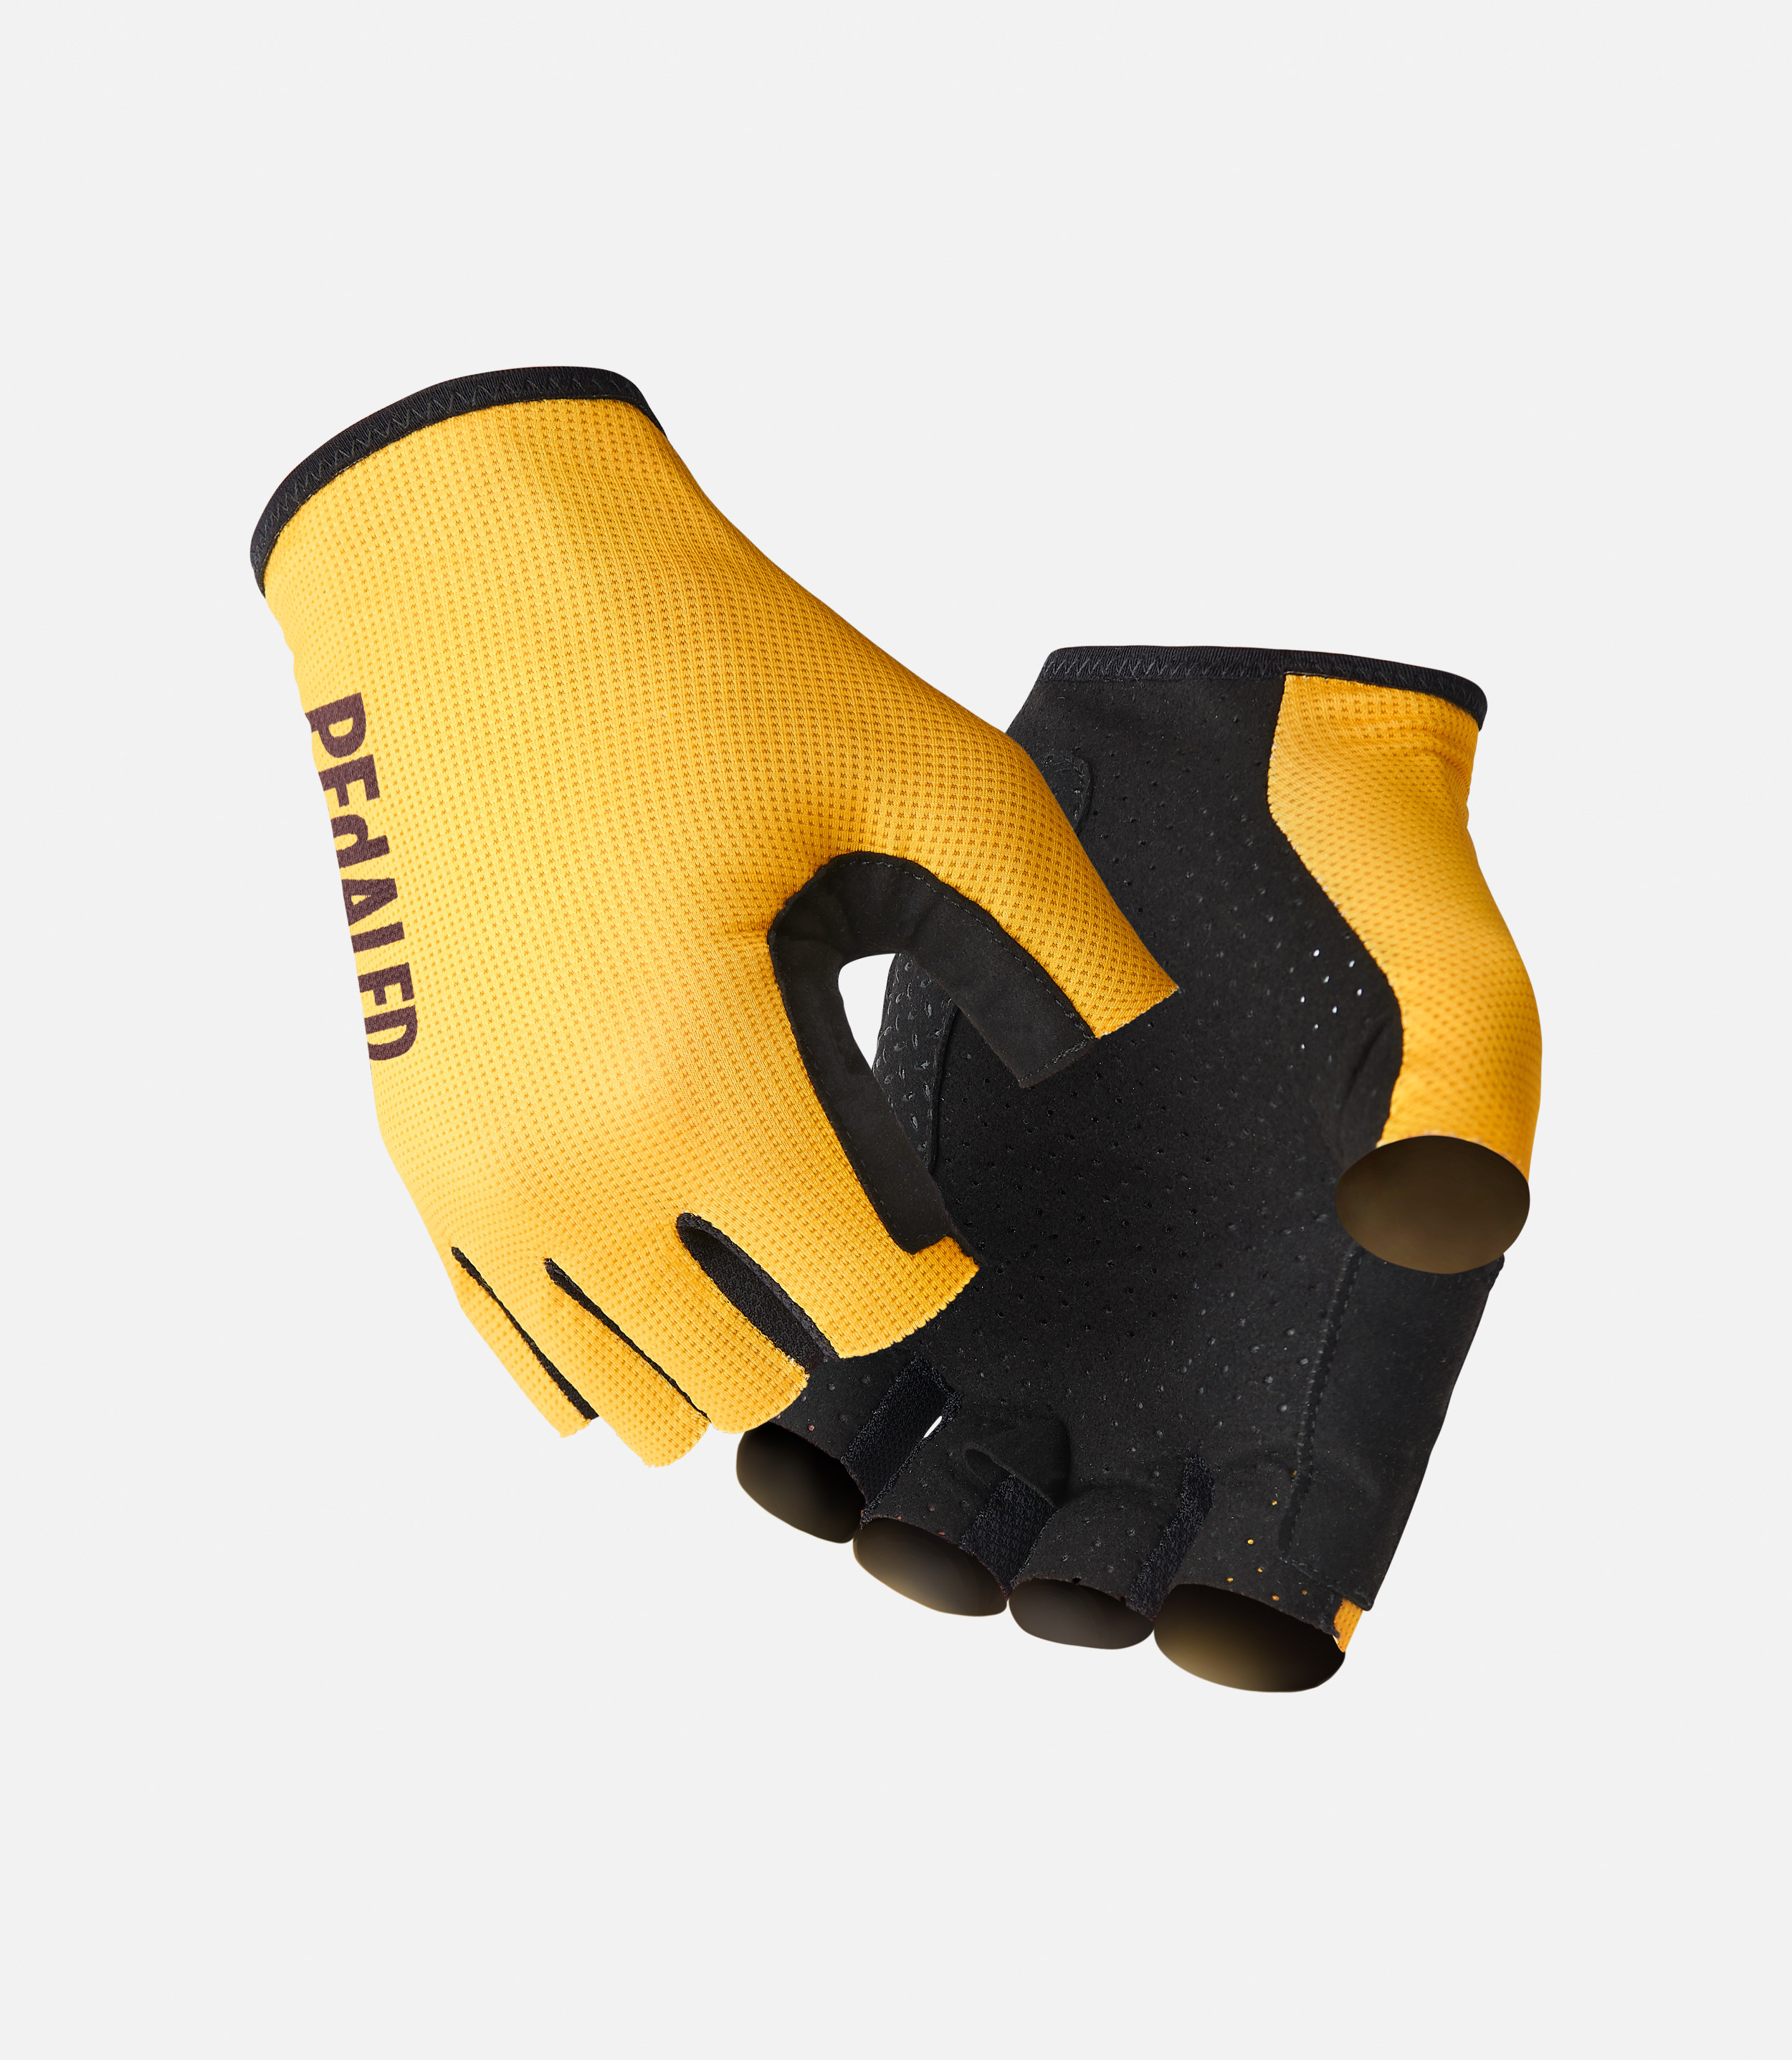 https://production-media-cdn.pedaled.com/media/catalog/product/c/y/cycling-gloves-yellow-mirai-pedaled.jpg